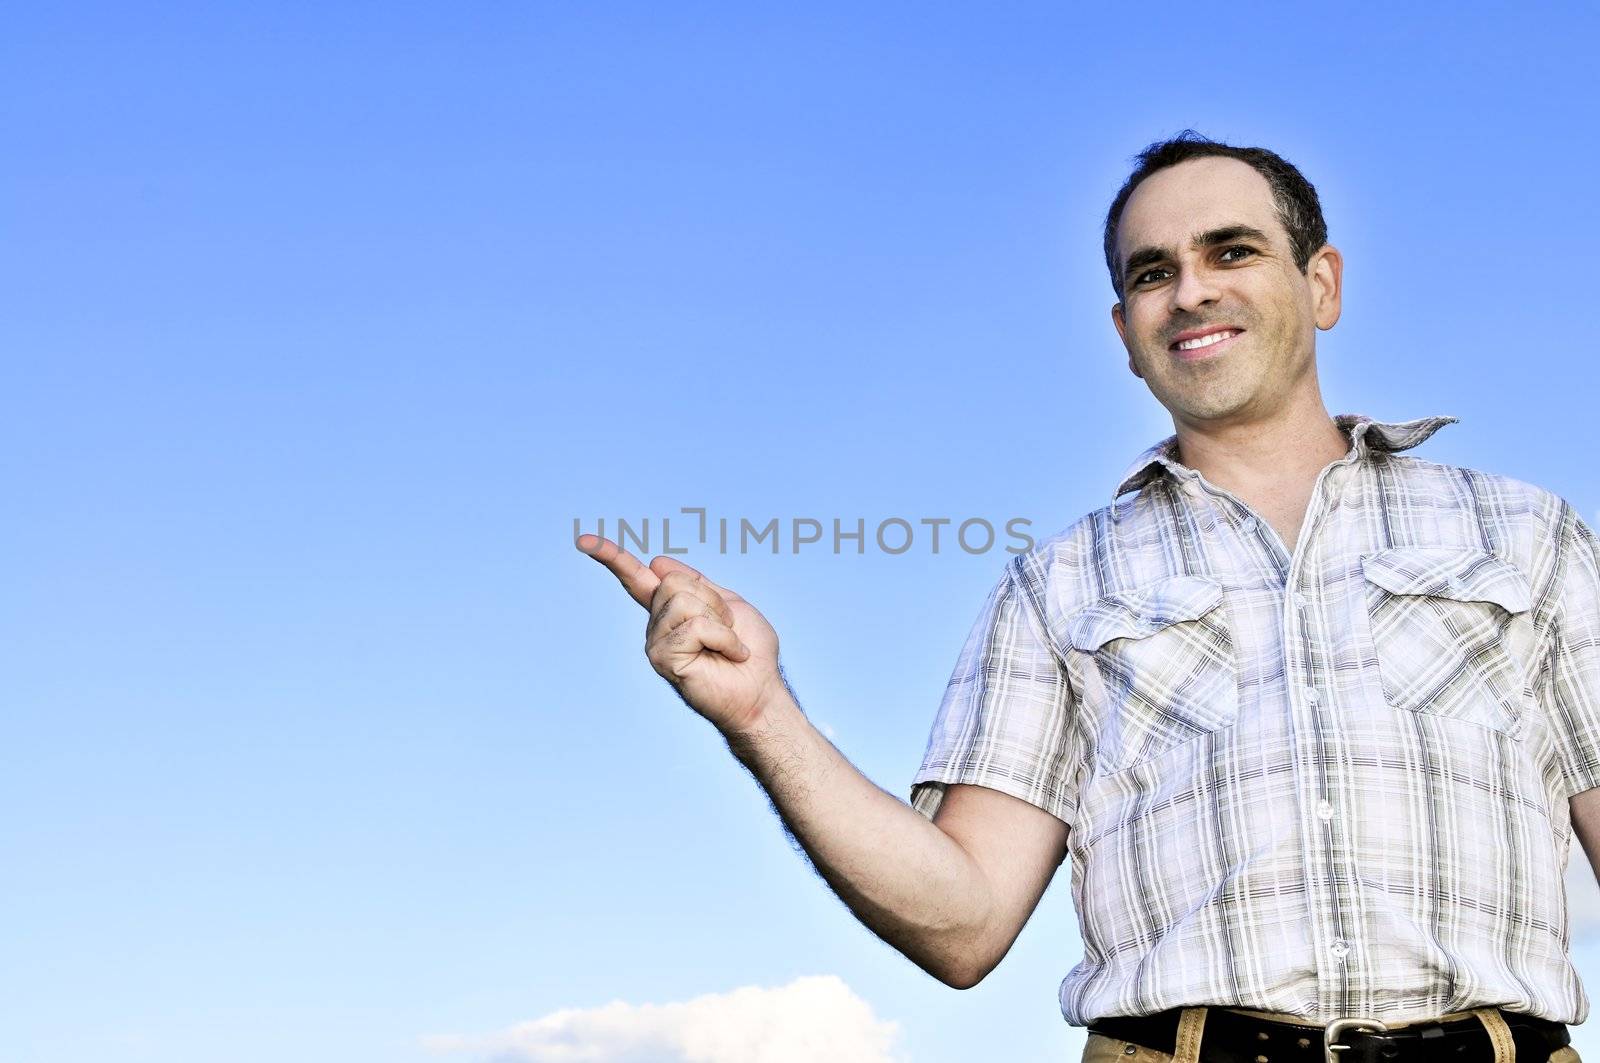 Happy middle aged man gesturing on blue sky background